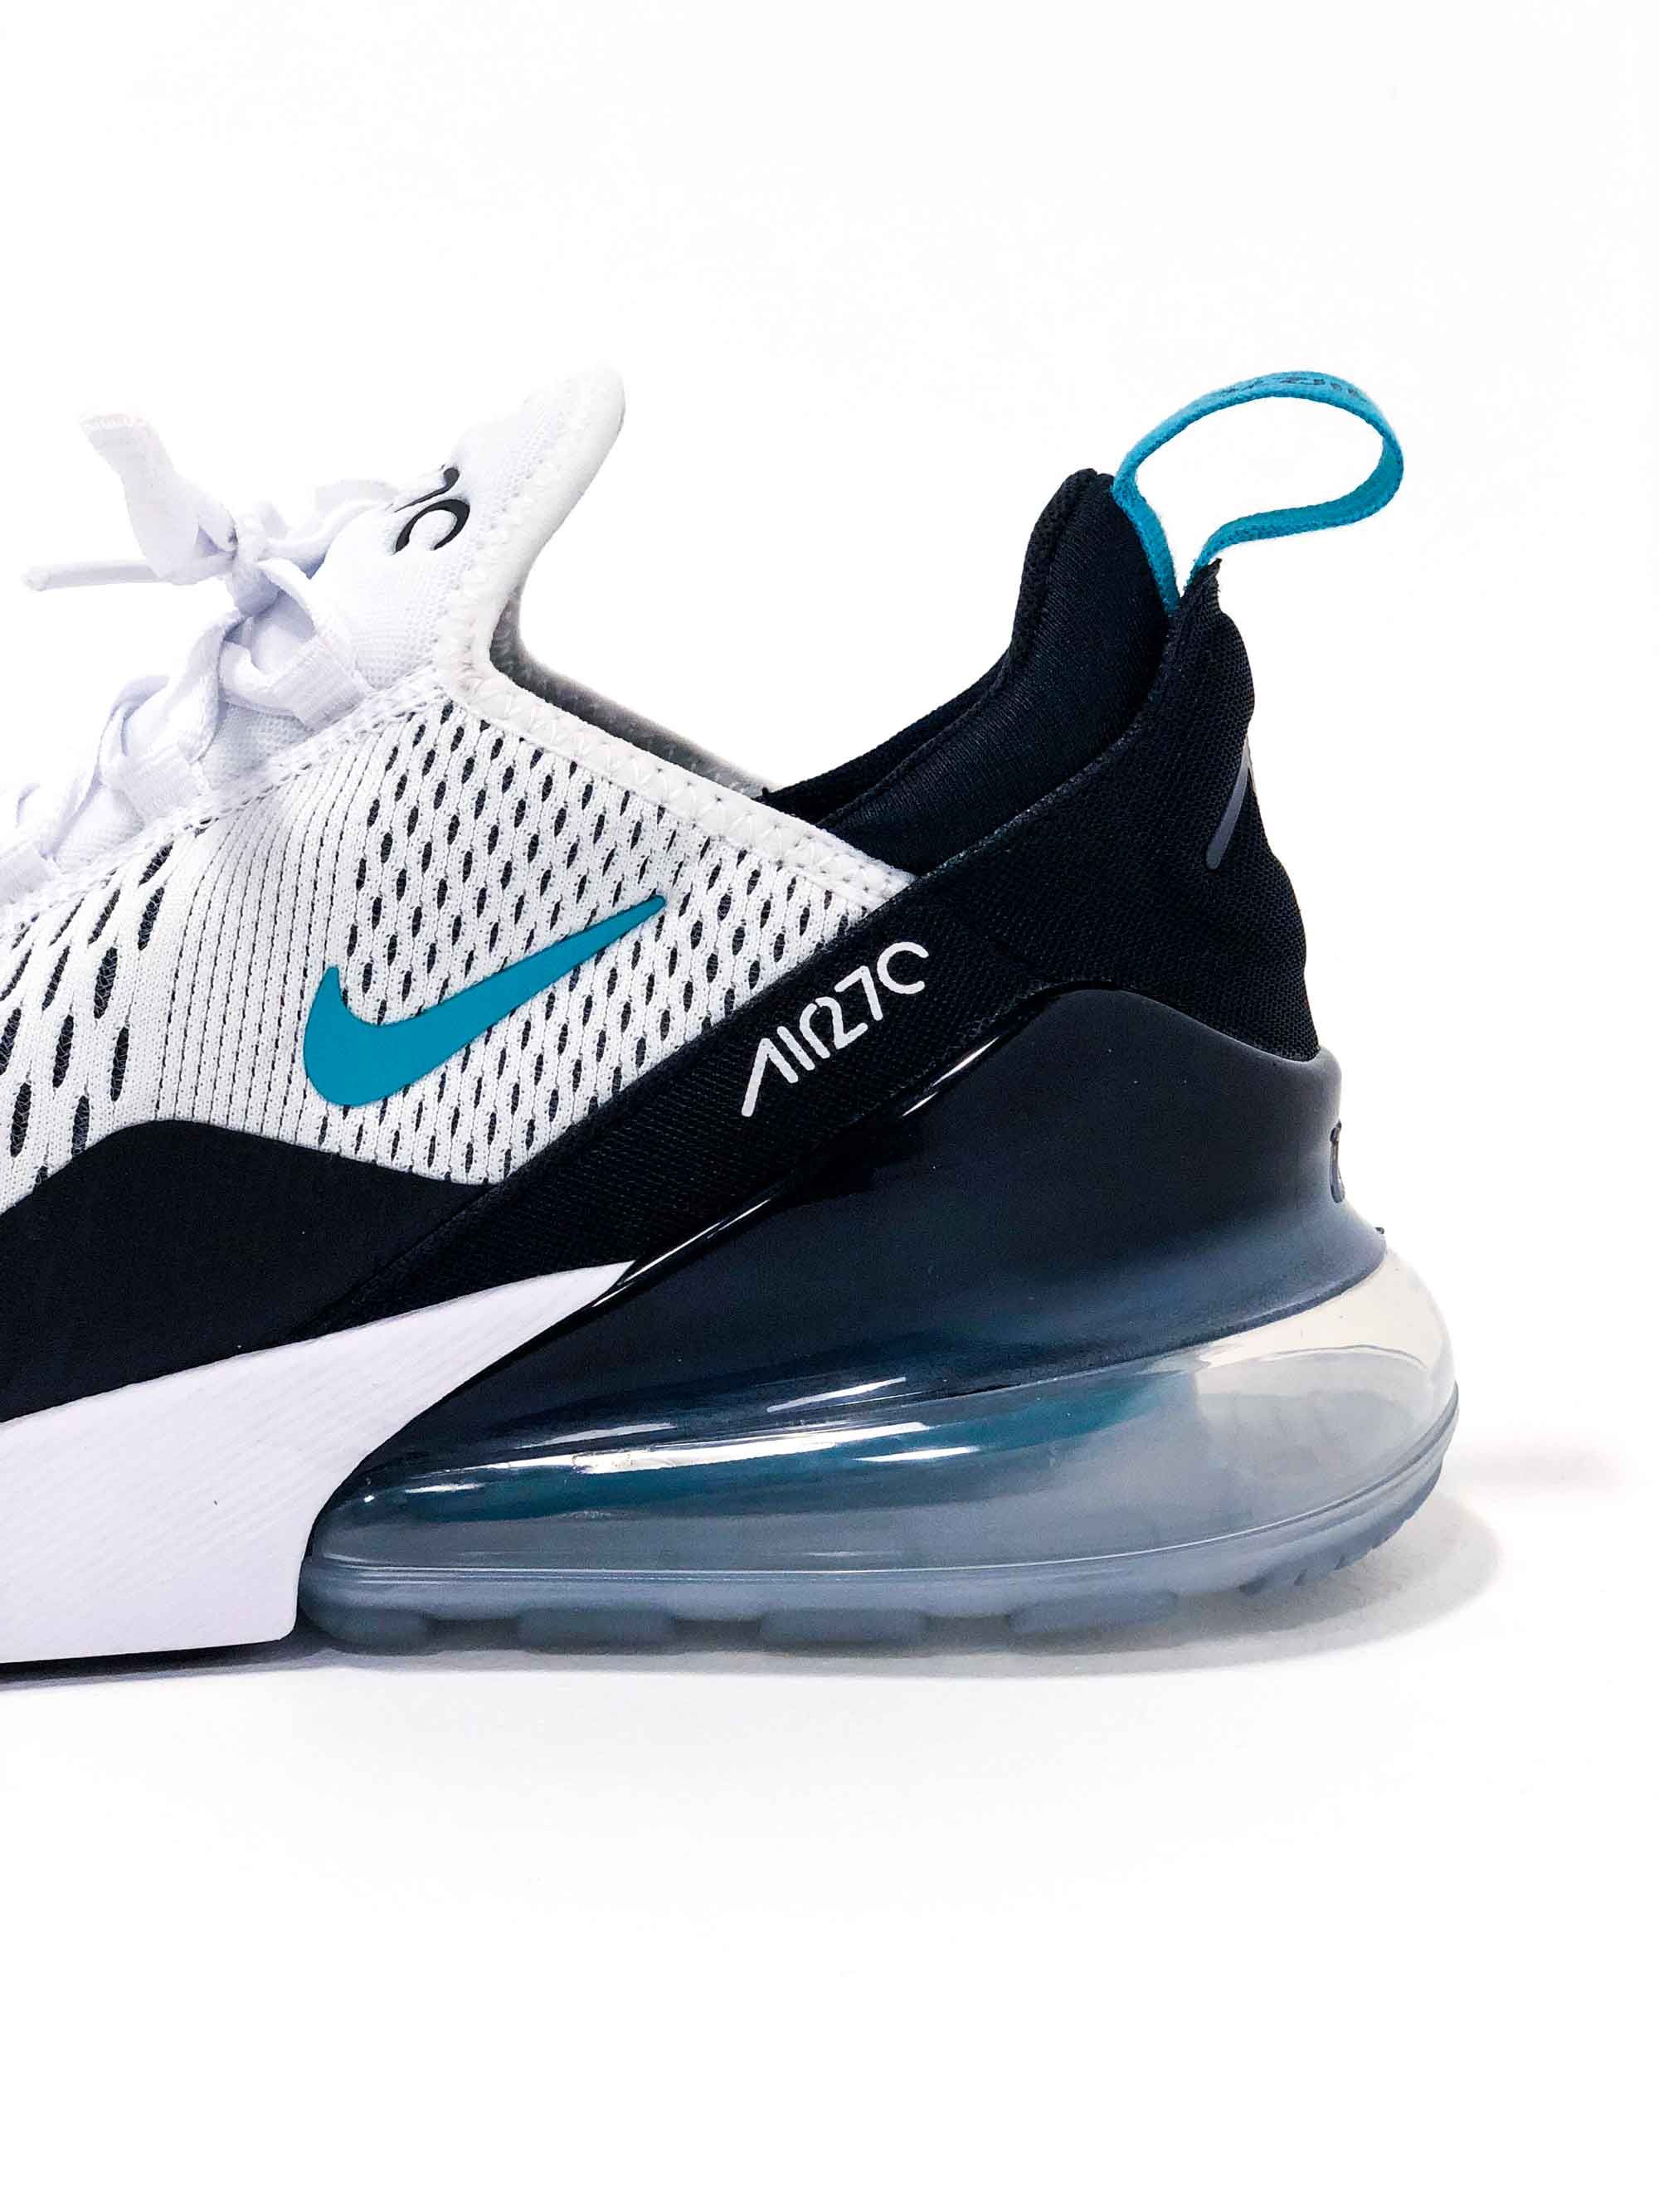 Nike's Newest Air Max Is More Than the Sum of Its Parts